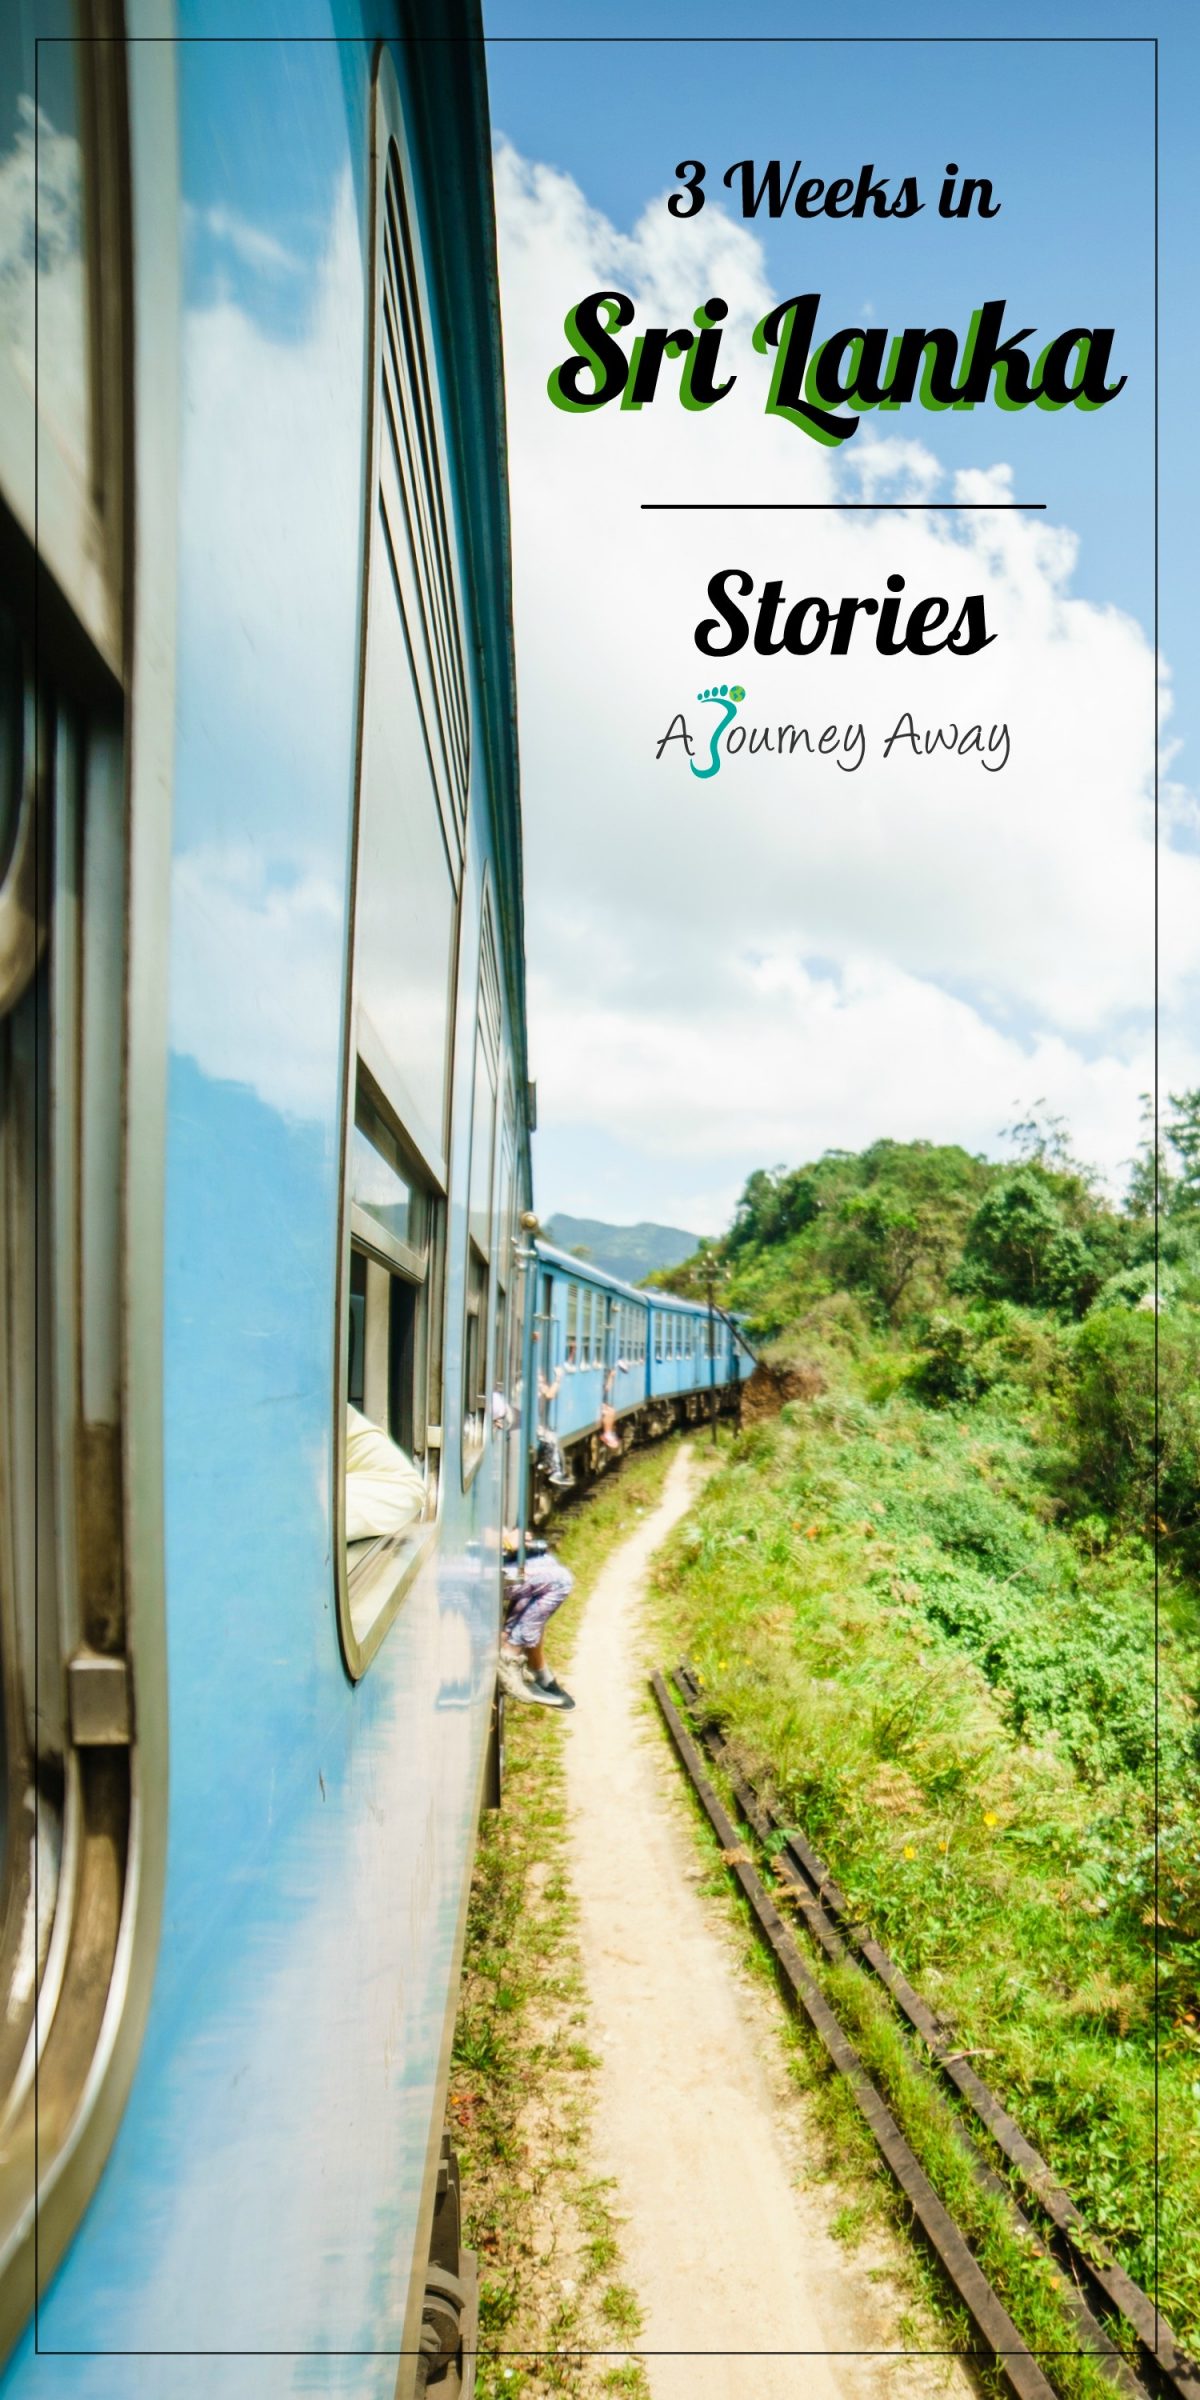 Stories from 3 Weeks in Sri Lanka | A Journey Away travel blog